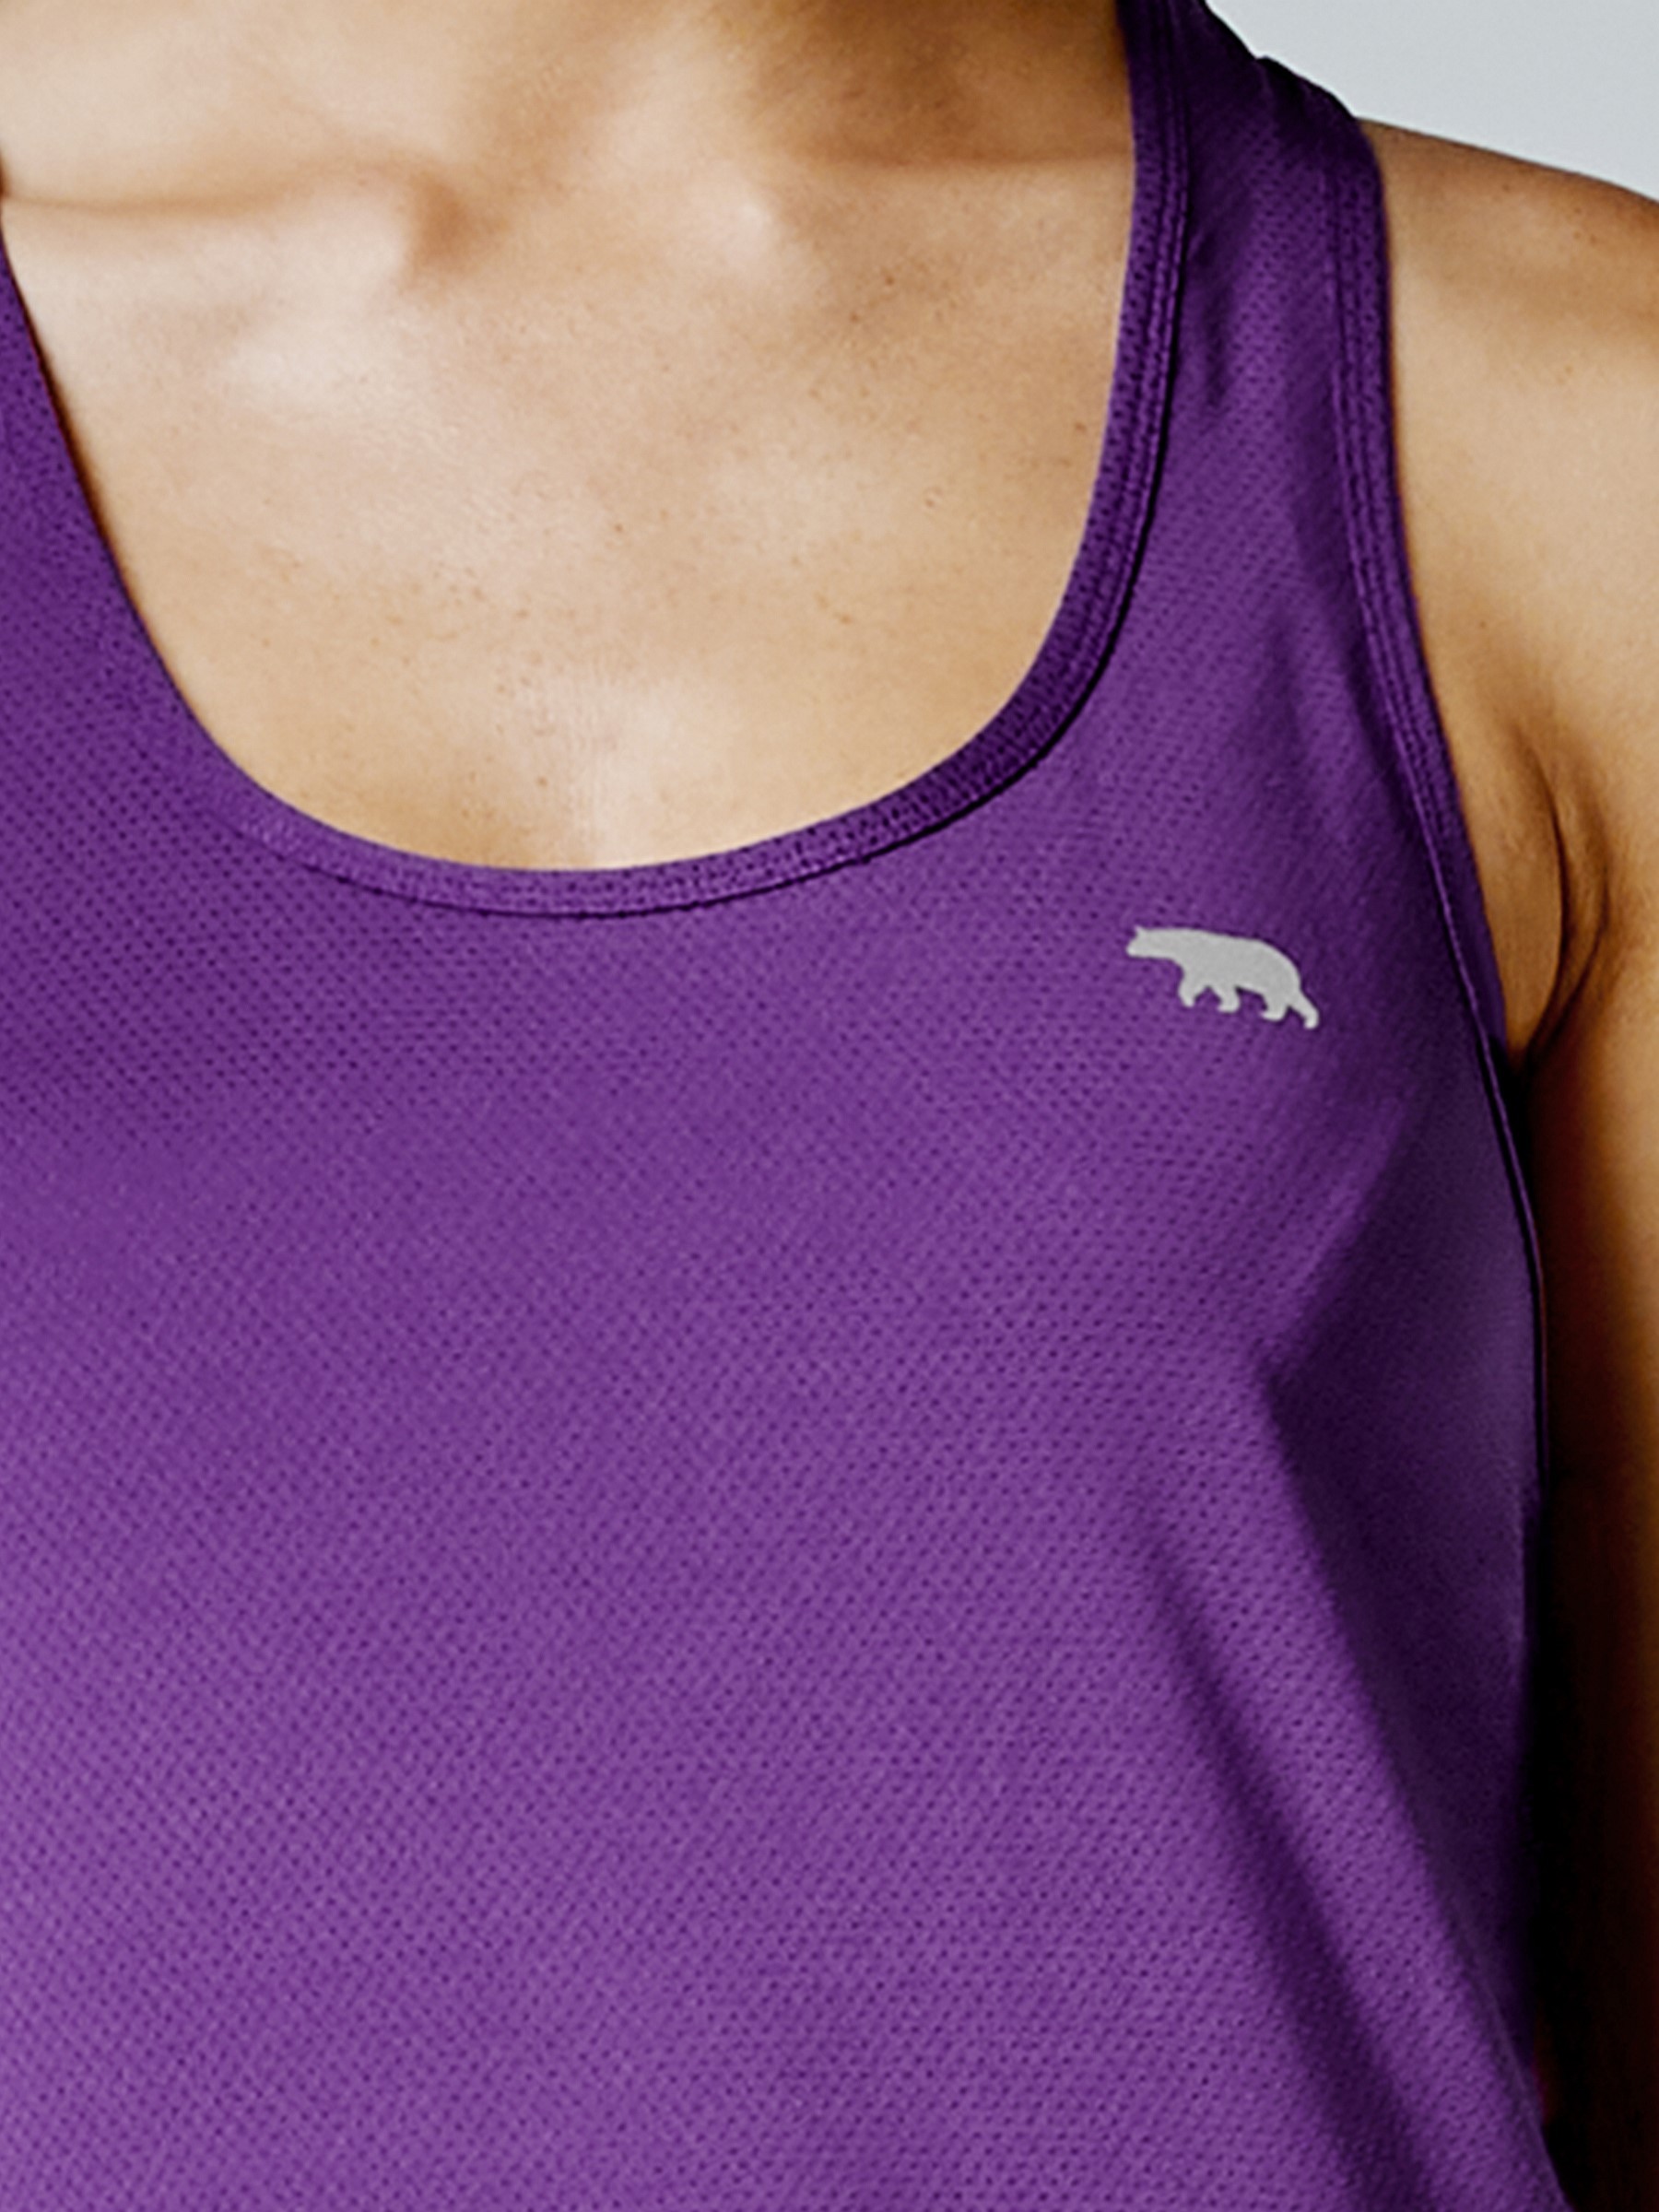 Running & Activewear Top for Women. Running Bare Workout Clothing